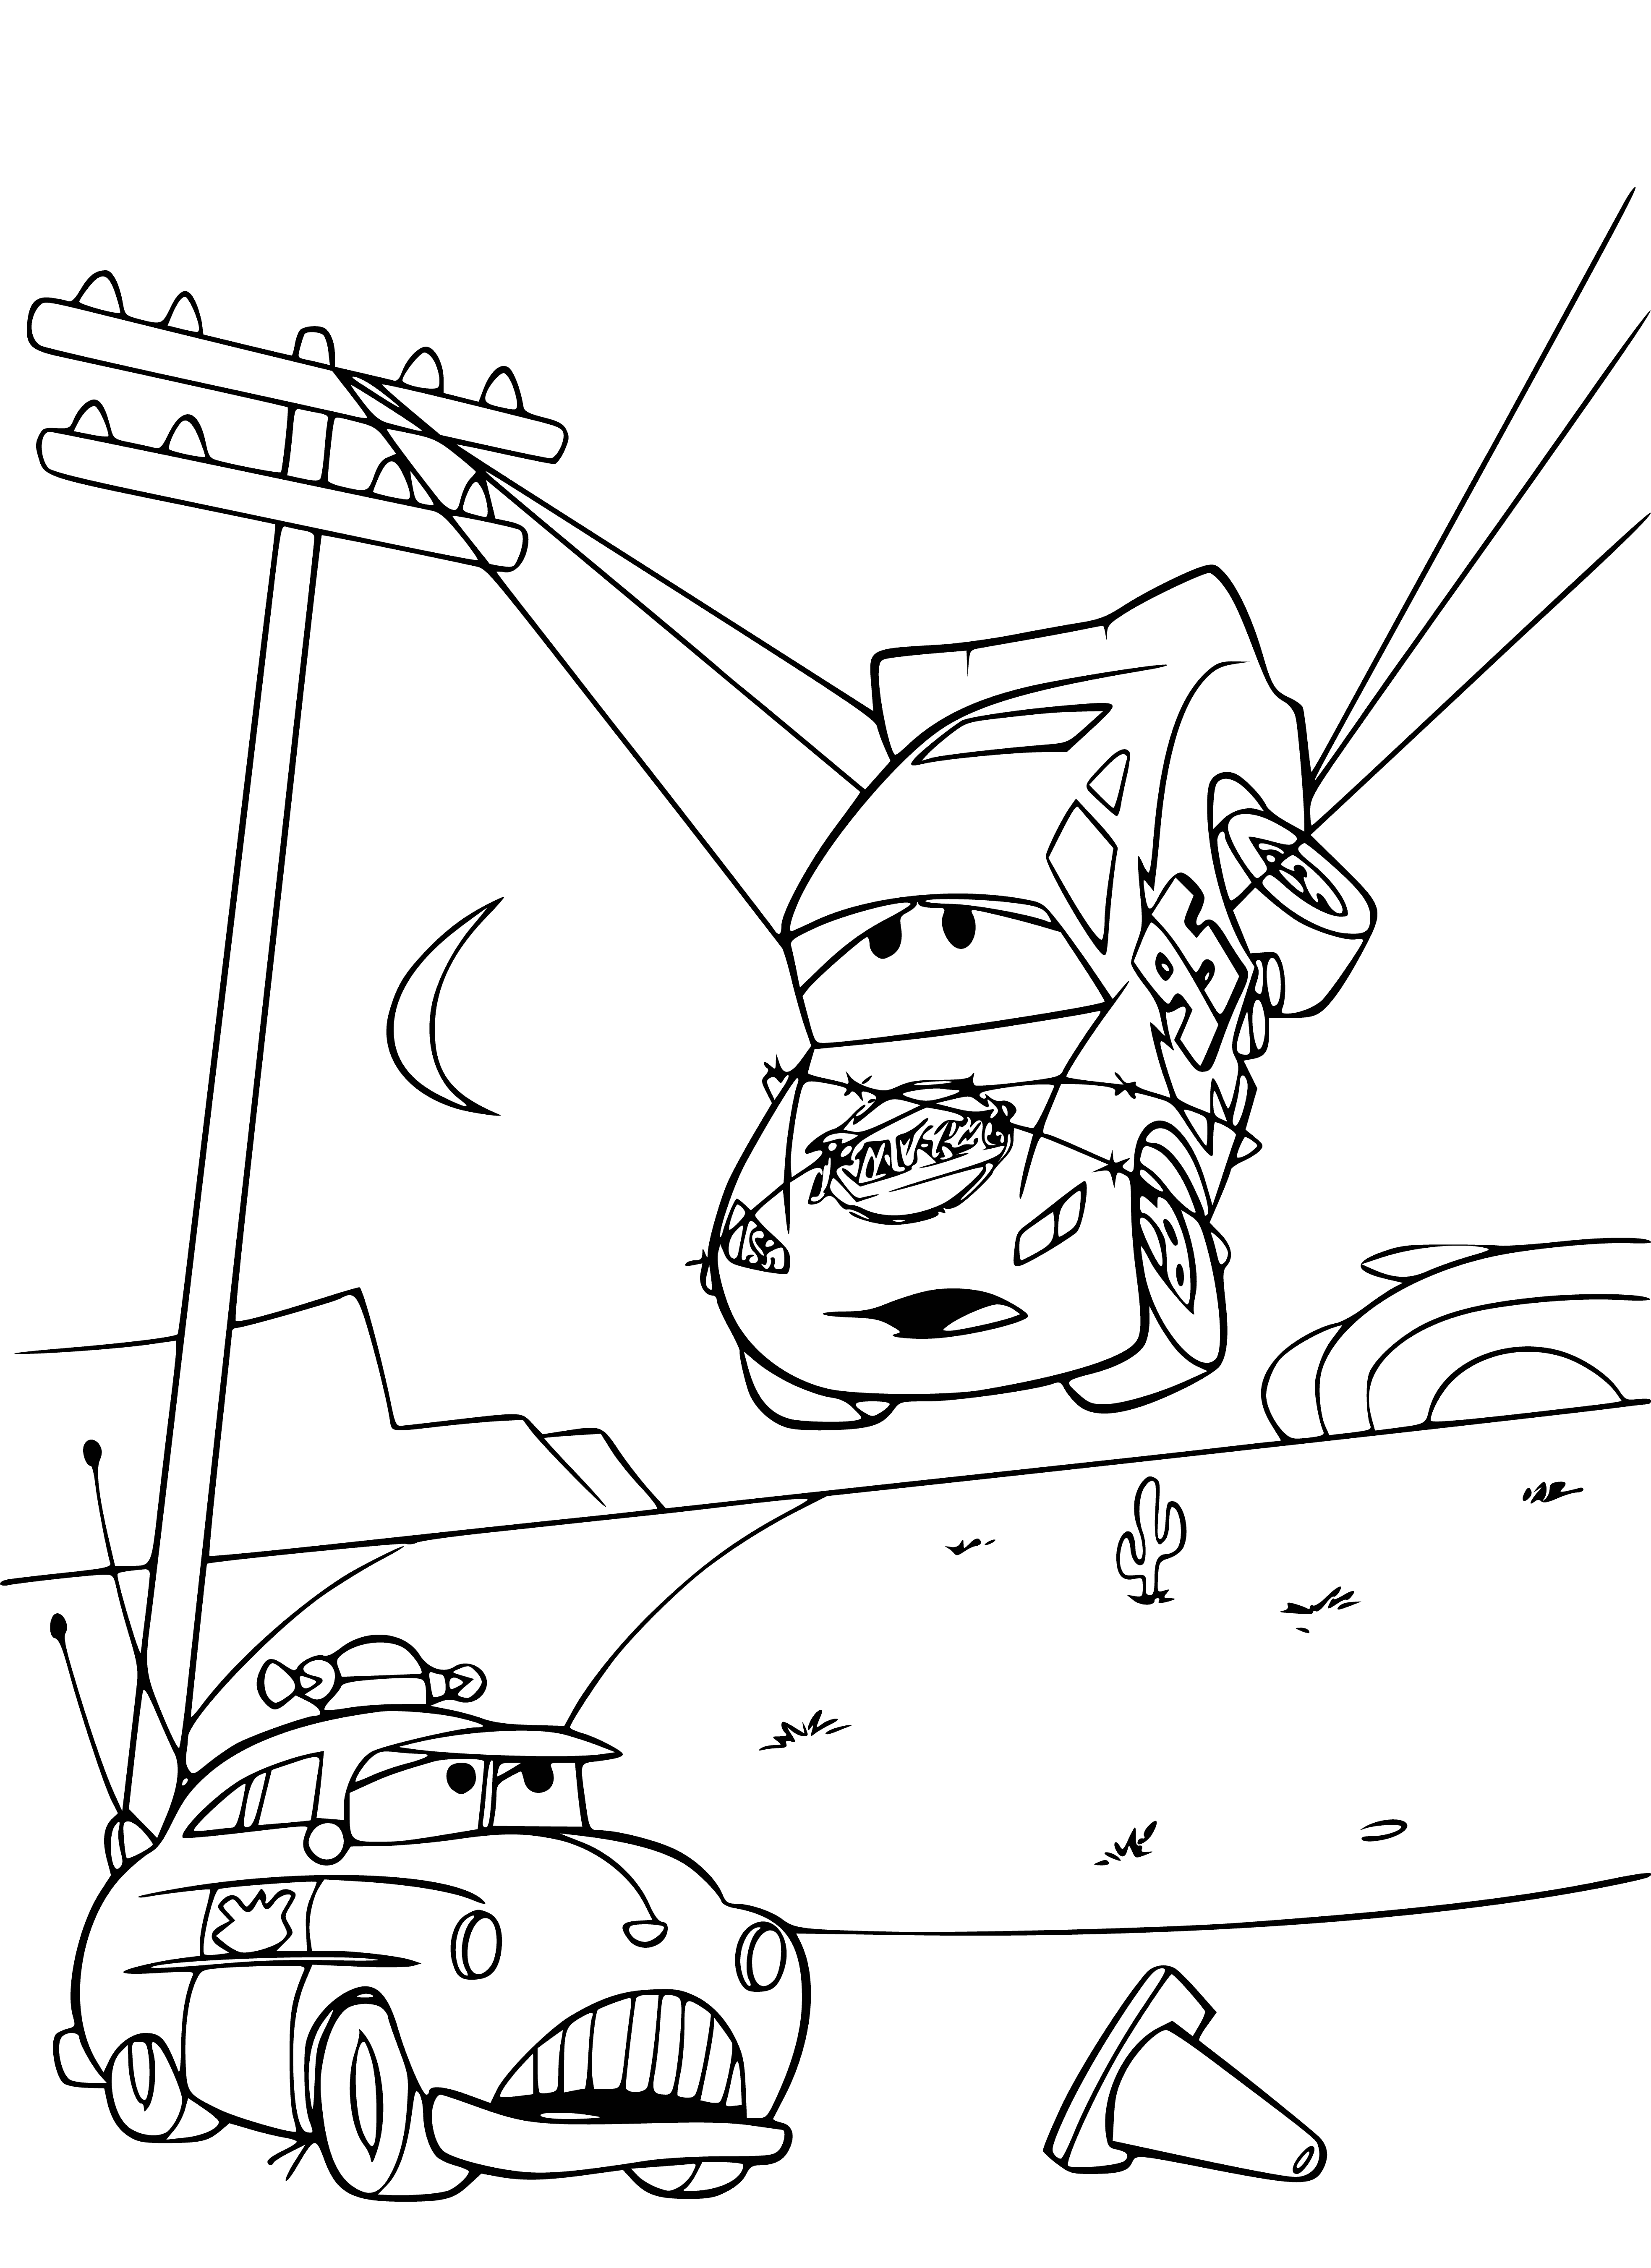 coloring page: He gets help from his four-legged friend to get free. 

Lightning McQueen gets help from his four-legged buddy to free himself from a web trap. #BFFGoals